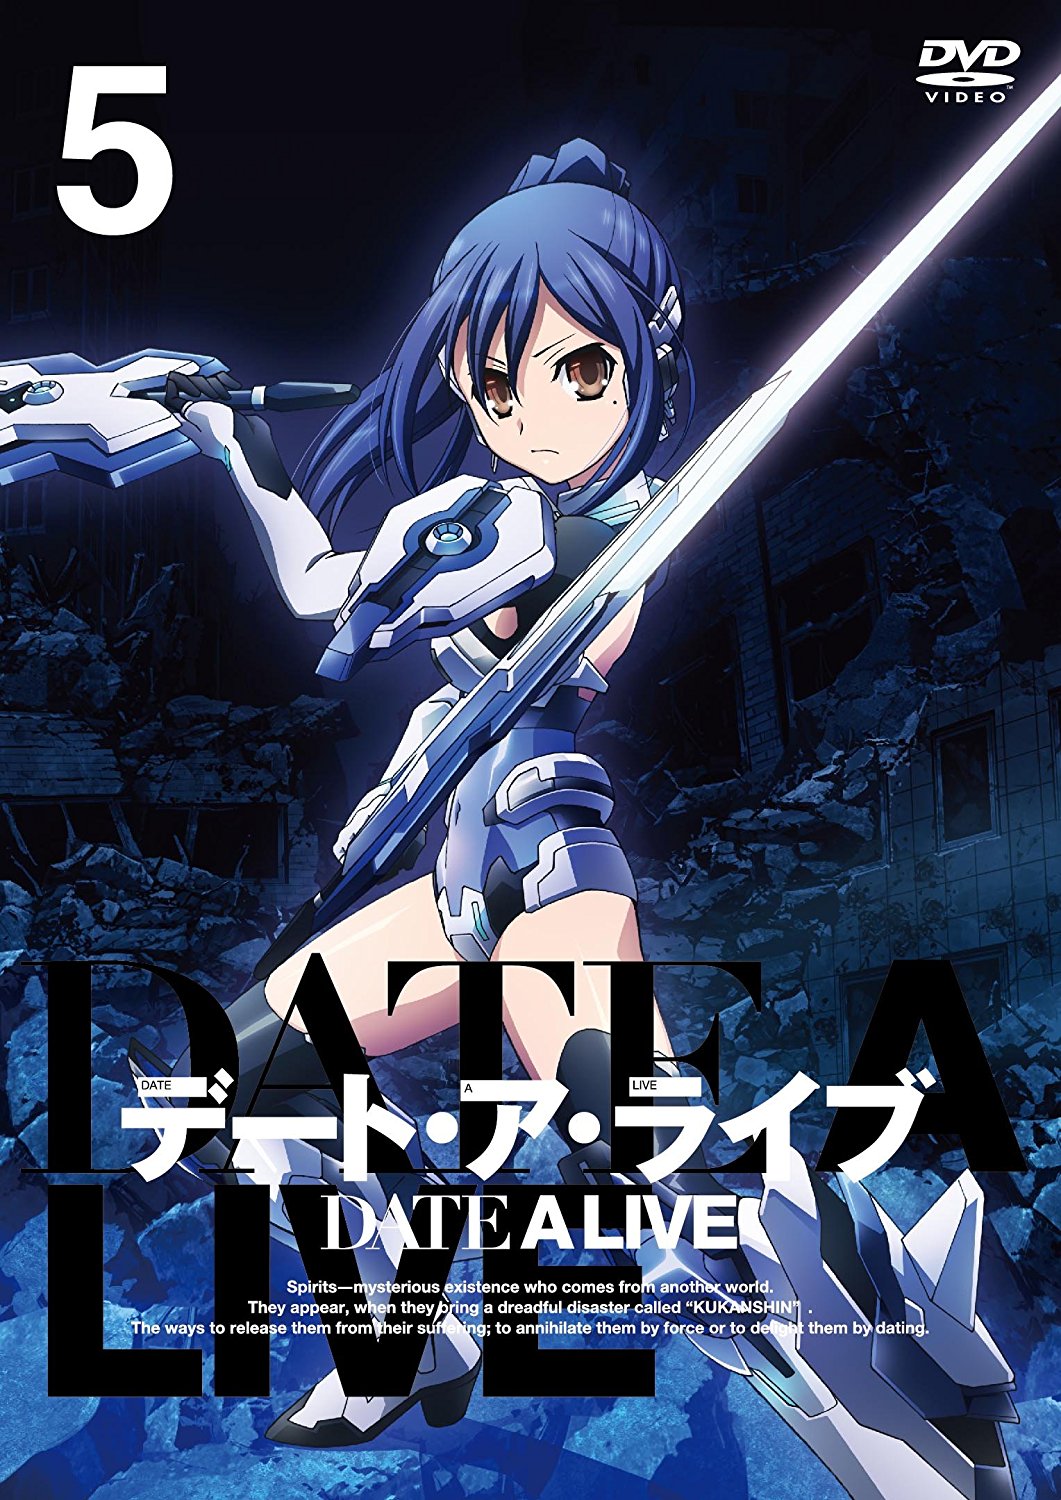 Date A Live Season 5 Trailer, Poster Released